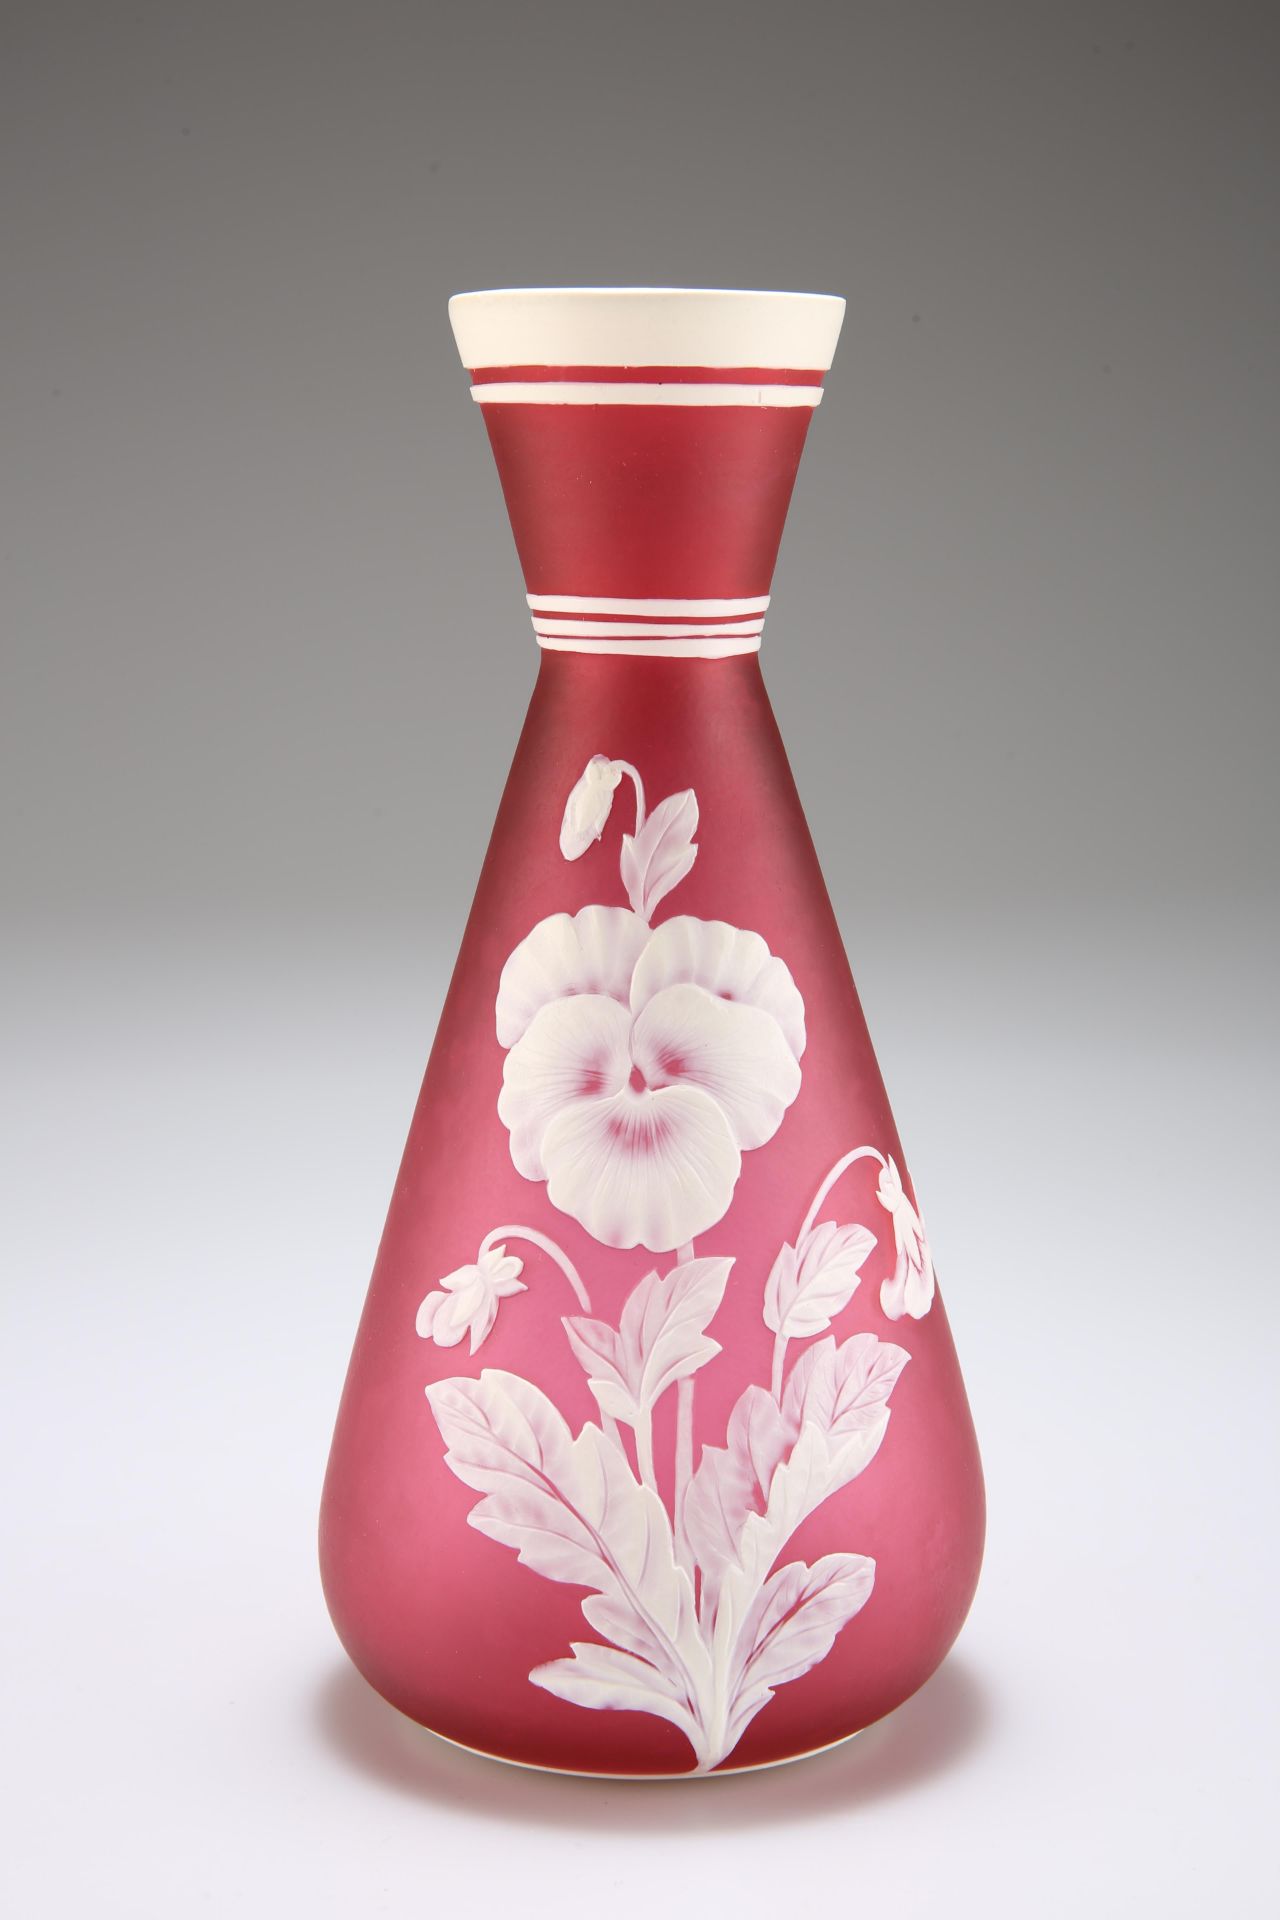 AN ENGLISH CAMEO GLASS VASE, PROBABLY BY THOMAS WEBB, LATE 19TH CENTURY,